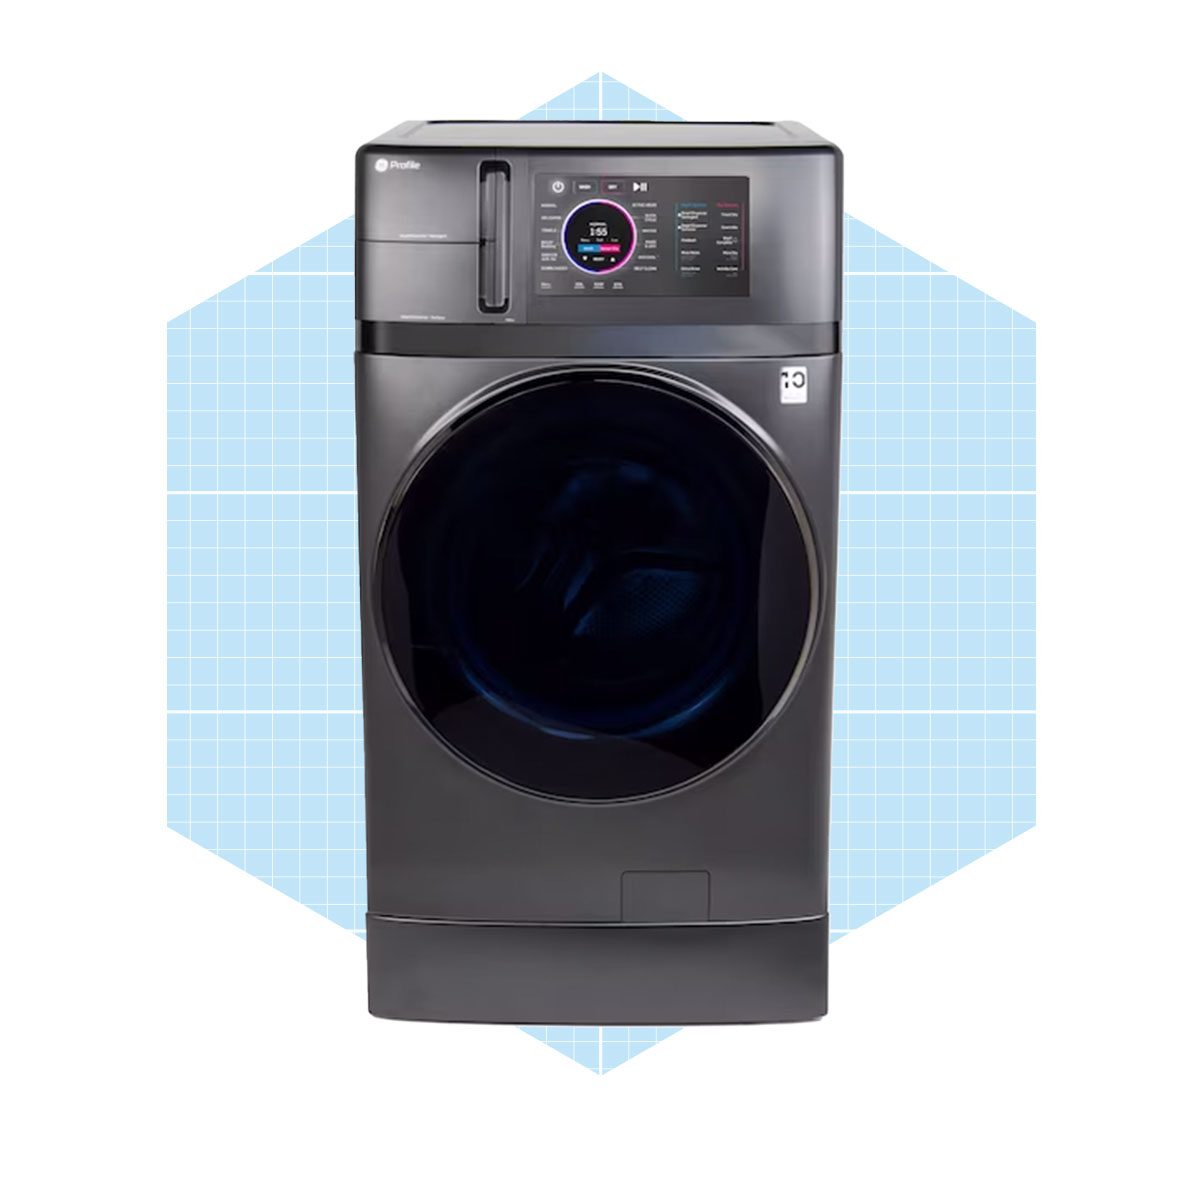 https://www.familyhandyman.com/wp-content/uploads/2023/10/GE-Profile-4.8-cu-ft-Capacity-Carbon-Graphite-Ventless-All-in-One-Washer-Dryer_ecomm_via-lowes.com_.jpg?fit=700%2C700